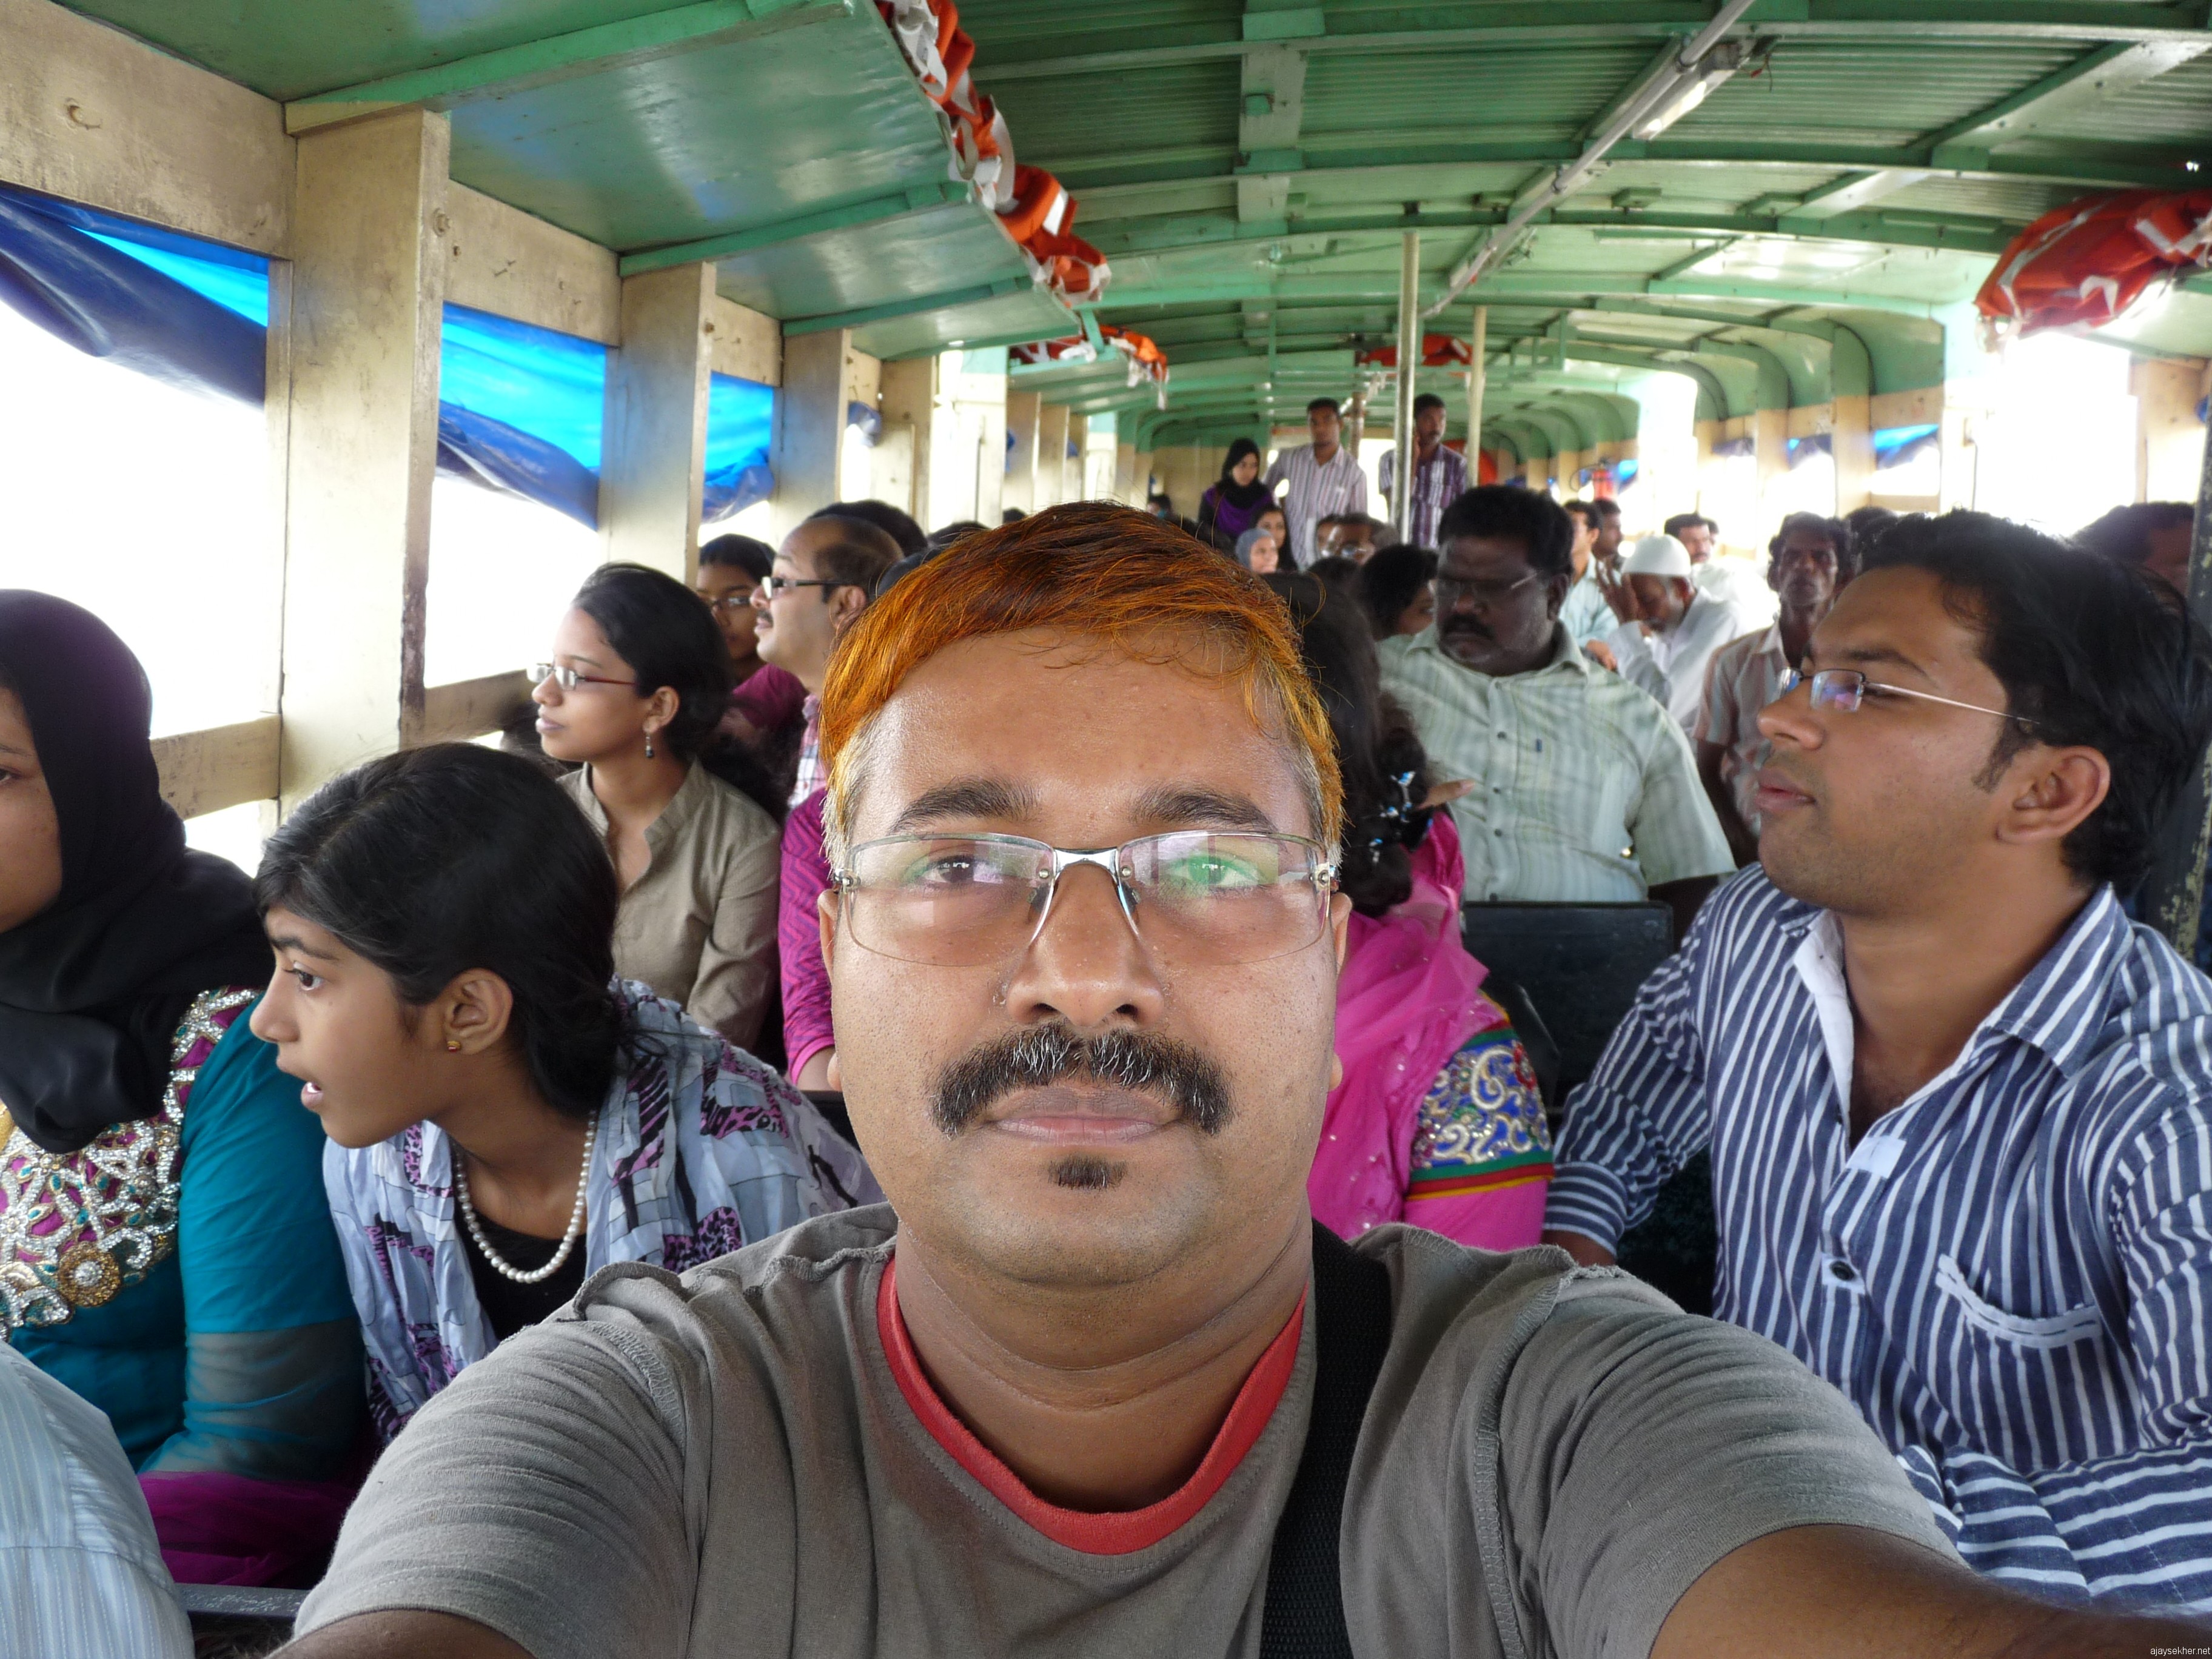 On the ferry boat from Ernakulam to Fort Kochi for the Biennale